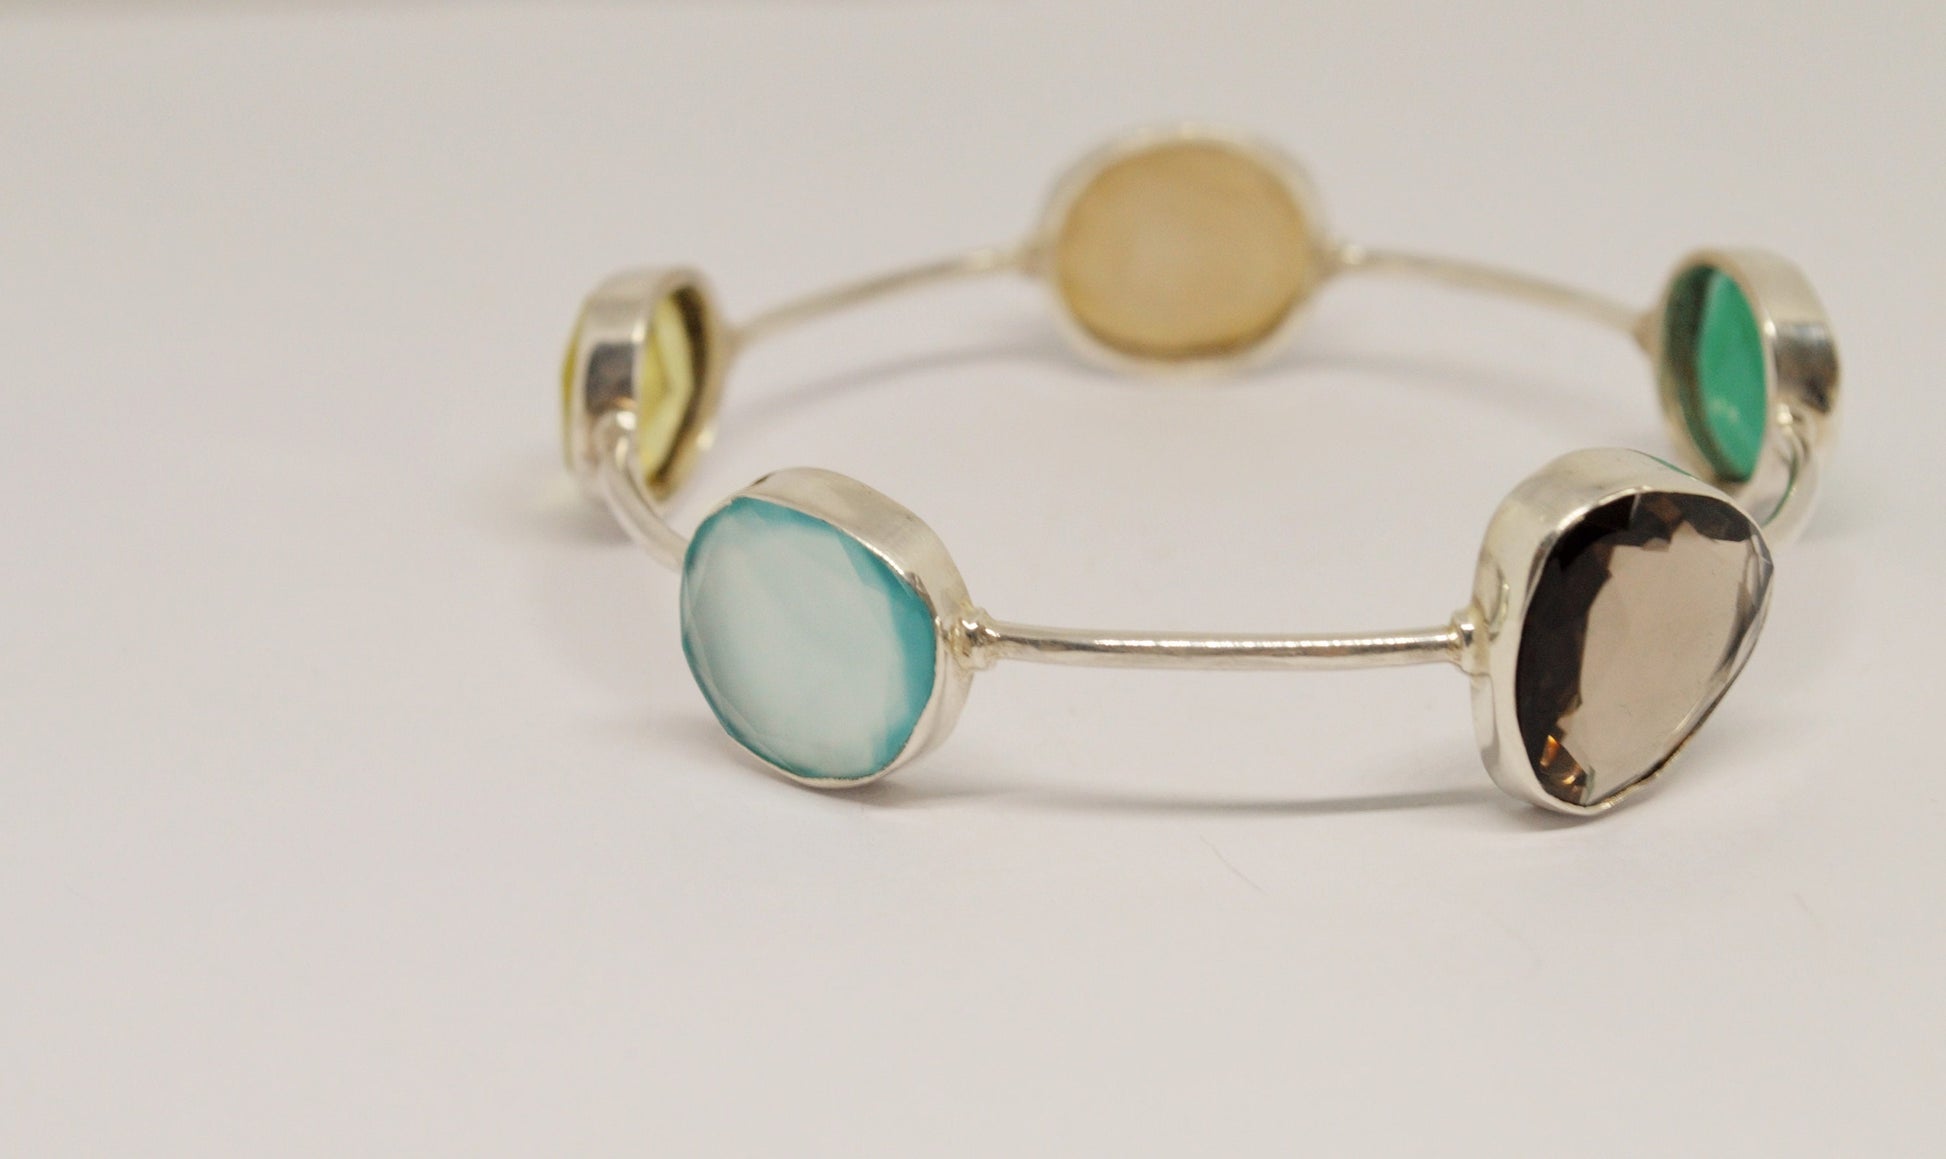 Multi Coloured Stone Silver Bangle Bracelet For a Small Wrist, Sterling Silver Gemstone Bracelets For Women, birthstone bangles, gifts